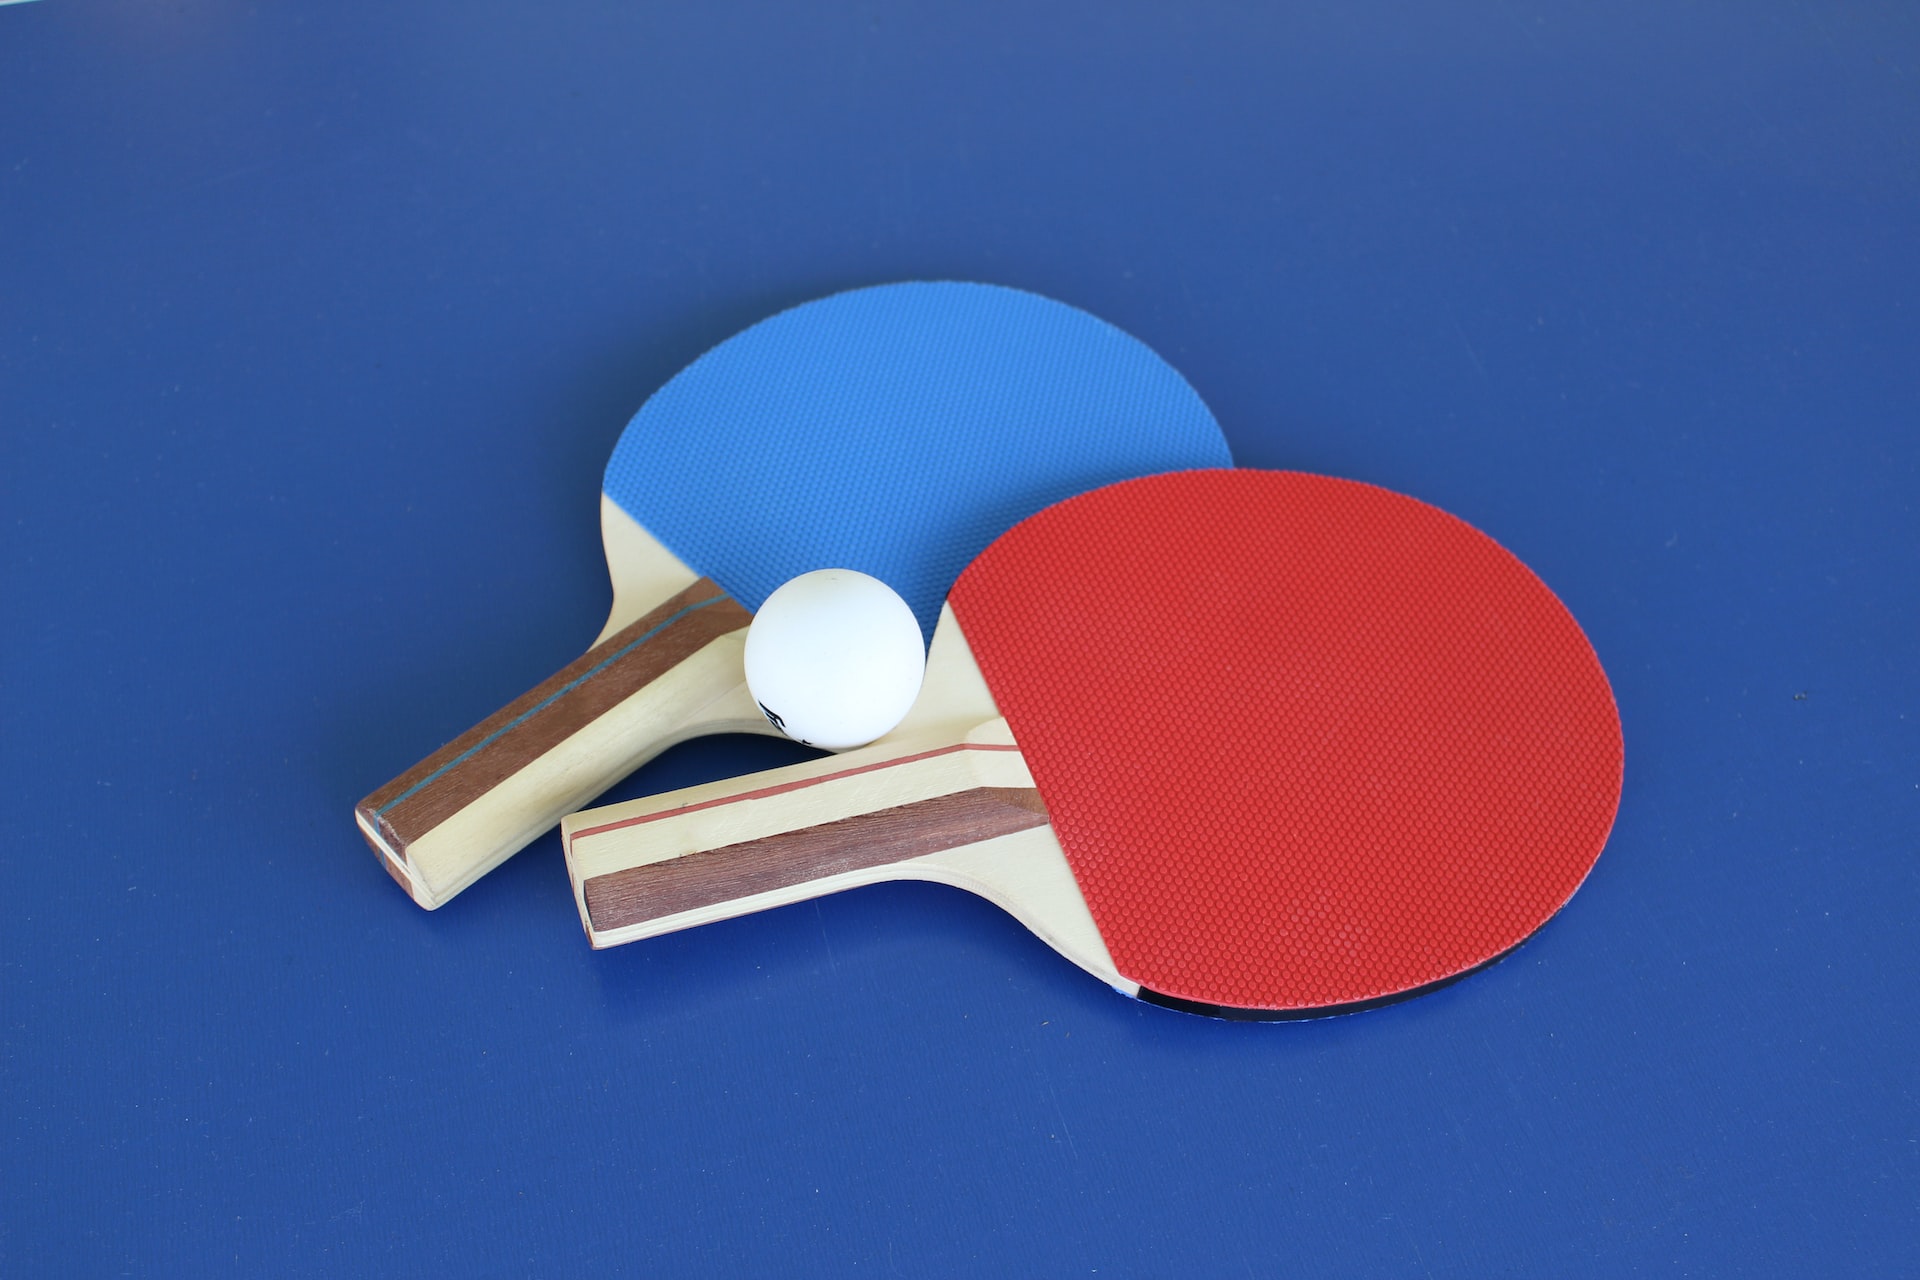 Top 7 Best Ping Pong Tables under $200